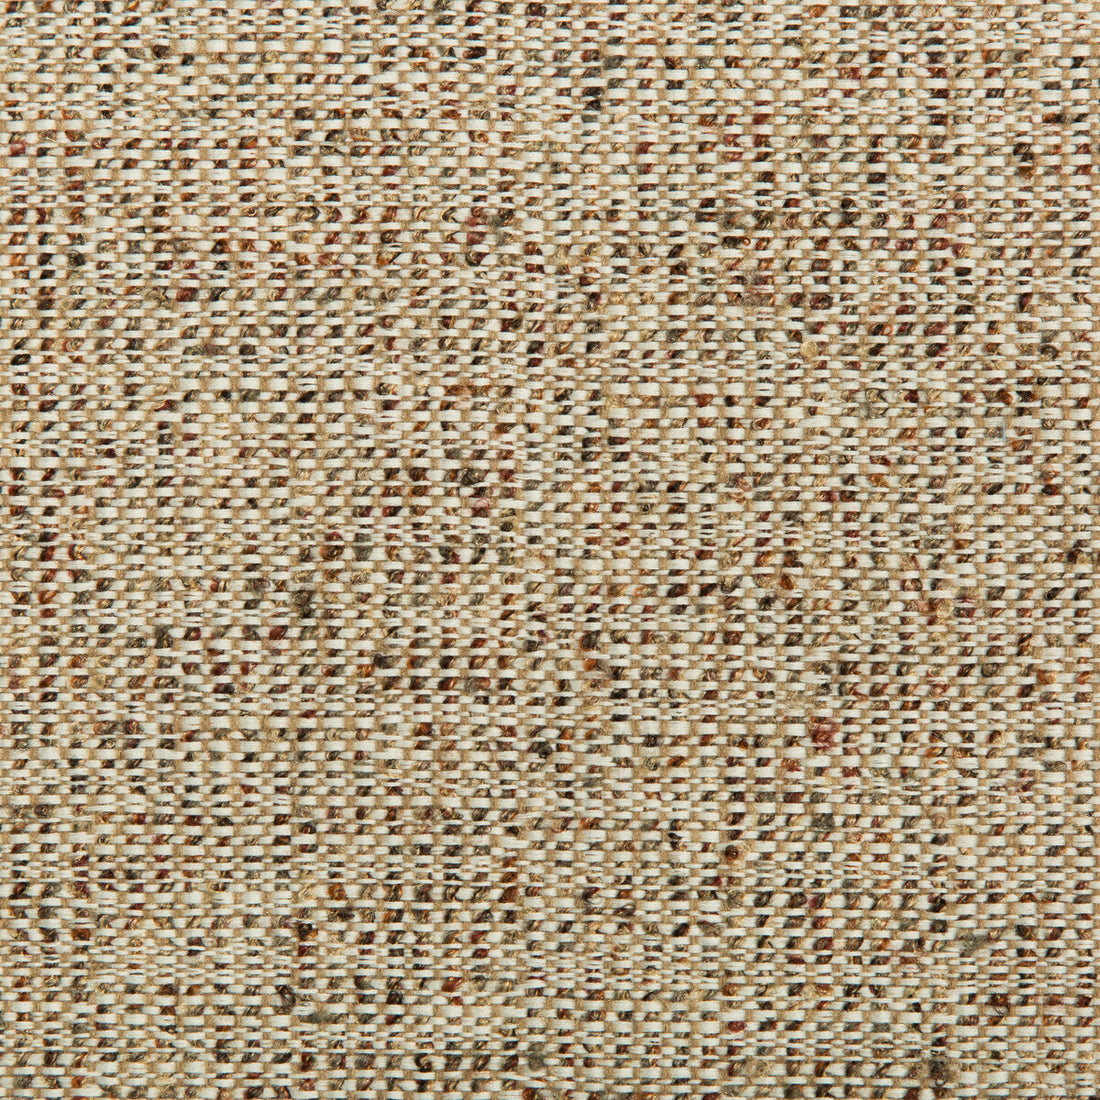 Kravet Contract fabric in 34635-916 color - pattern 34635.916.0 - by Kravet Contract in the Crypton Incase collection